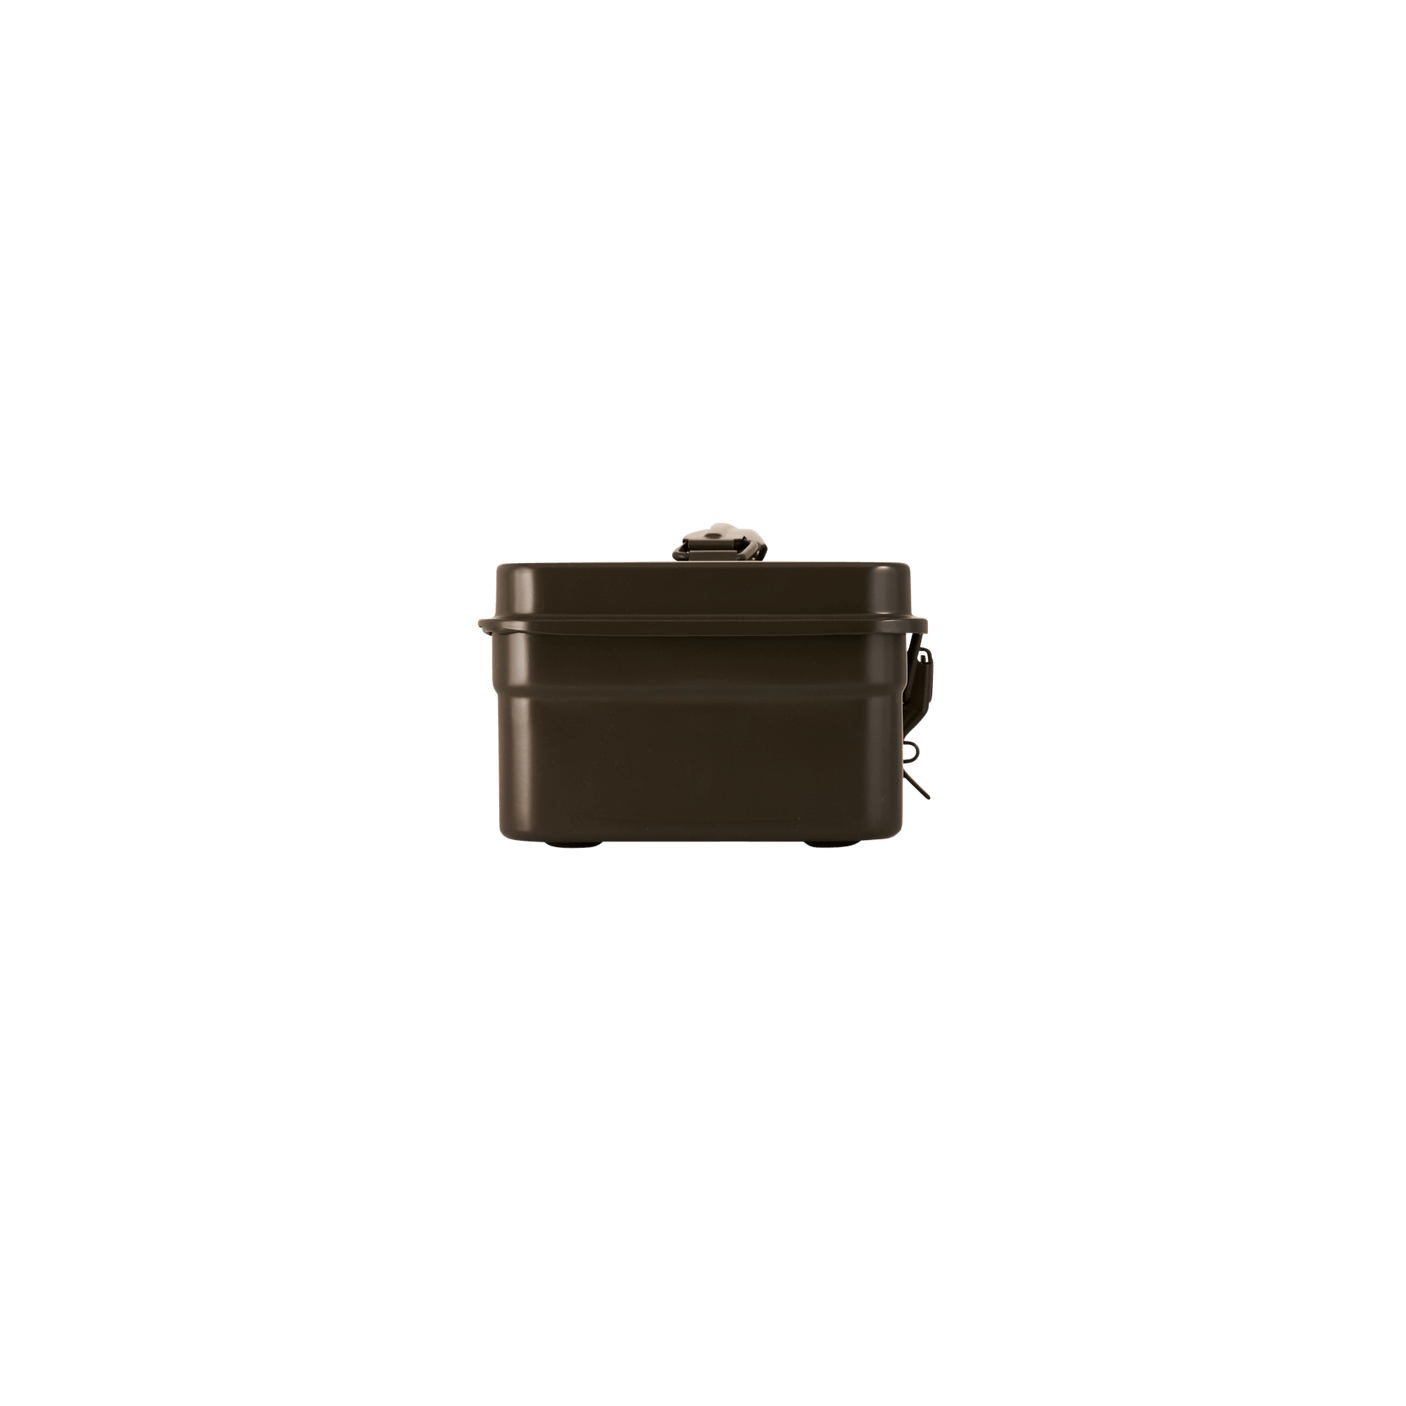 TOYO Trunk Shape Toolbox T-320 MG (Moss green) - Tool Bags Boxes and Rolls - Japanese Tools Australia